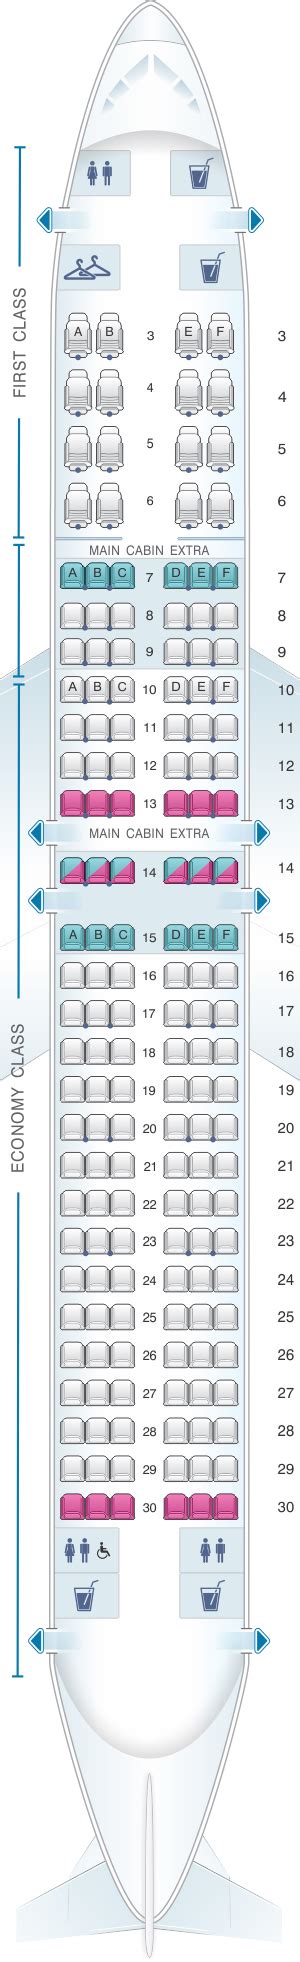 A quick look at aeroLOPA's seat map data will tell you that, as is typical for a budget carrier, Sun Country Airlines configures its passenger-carrying Boeing 737-800s in an all-economy layout. This setup can accommodate 186 passengers, but N836SY is very different. Indeed, its configuration is essentially the polar opposite, consisting .... 